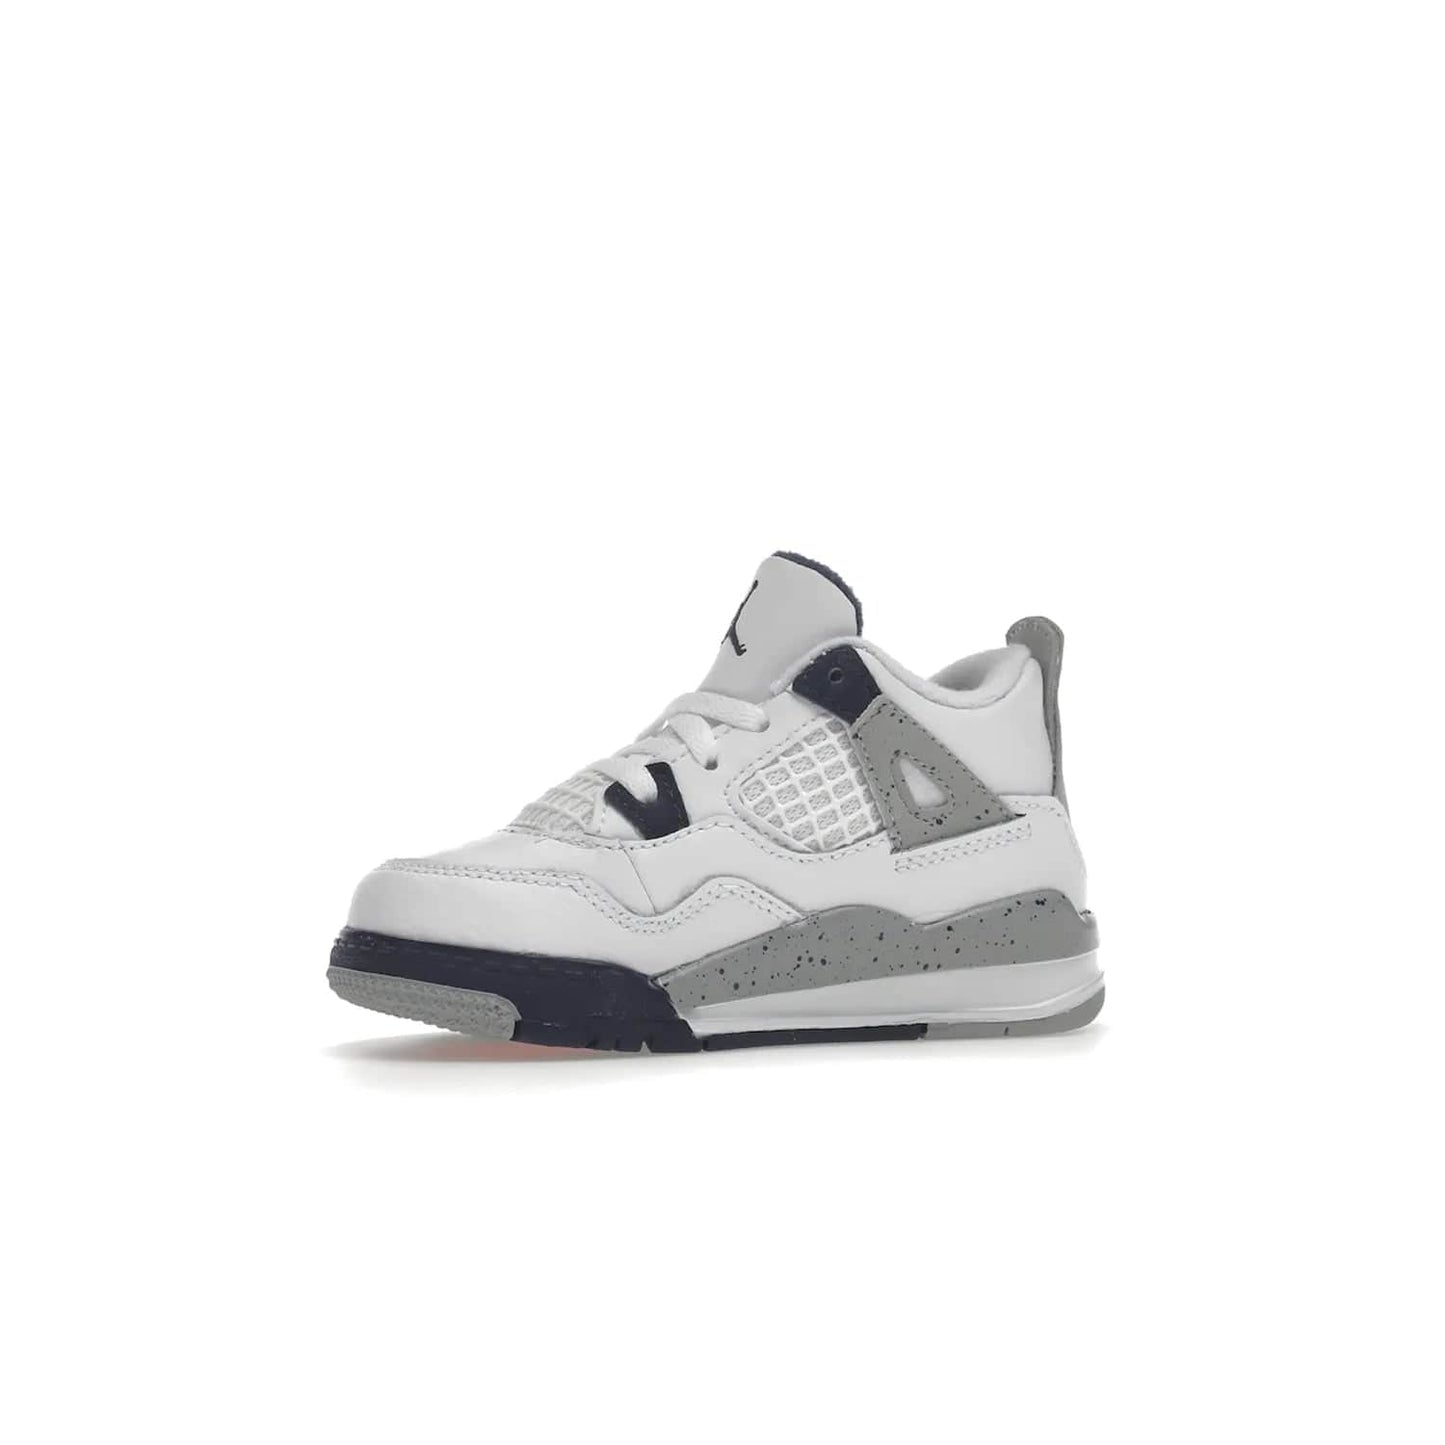 Jordan 4 Retro Midnight Navy (TD) - Image 17 - Only at www.BallersClubKickz.com - Introducing the Jordan 4 Retro Midnight Navy (TD) for kids. White leather upper with navy and grey accents plus fire red detailing. Perfect for everyday wear. Get yours before they sell out.